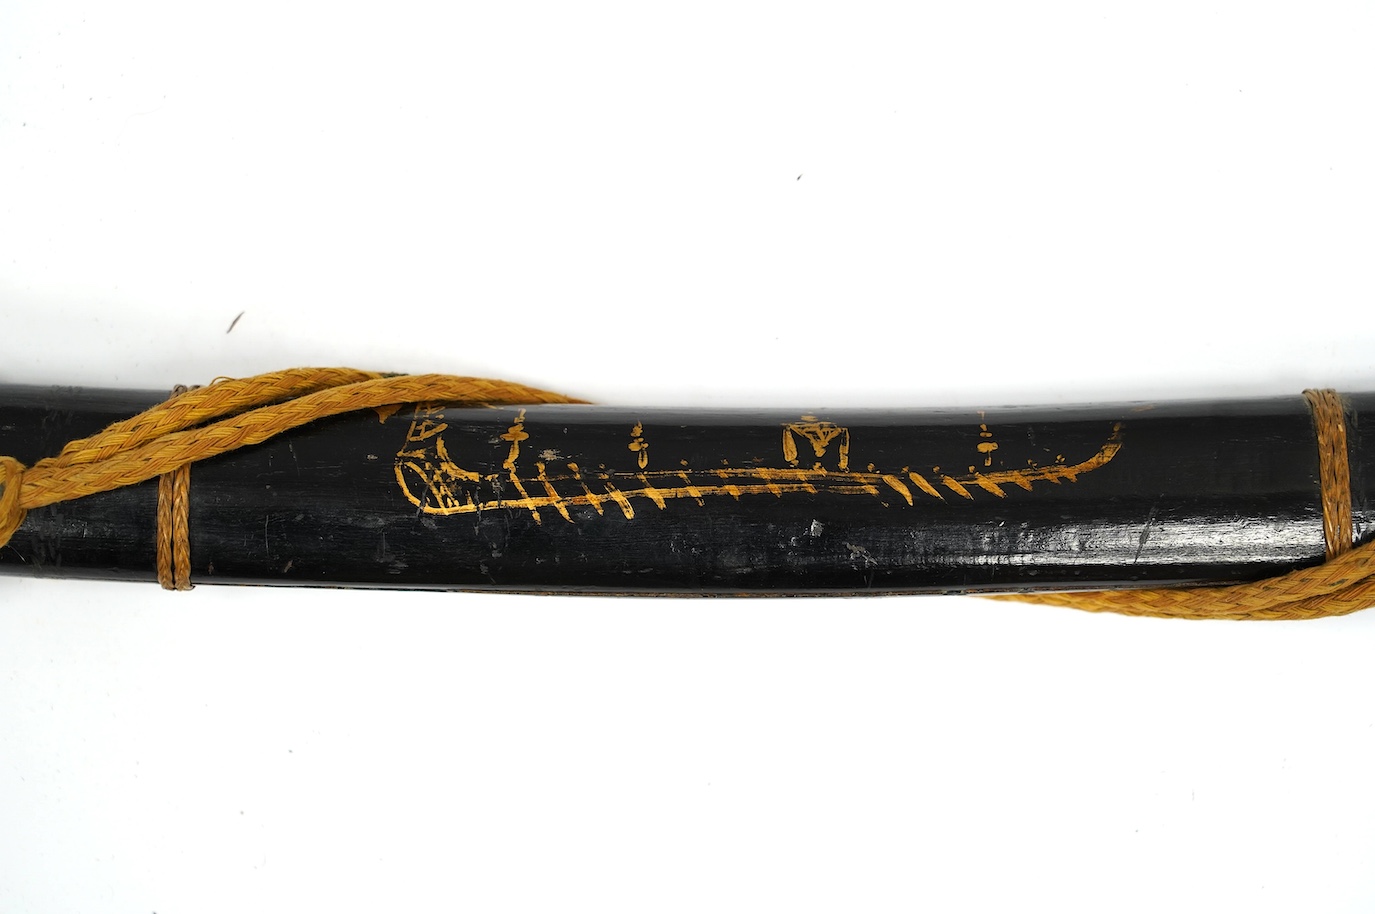 A Thai sword Dha, with a lacquered hilt and wooden scabbard, blade 56cm. Condition - fair